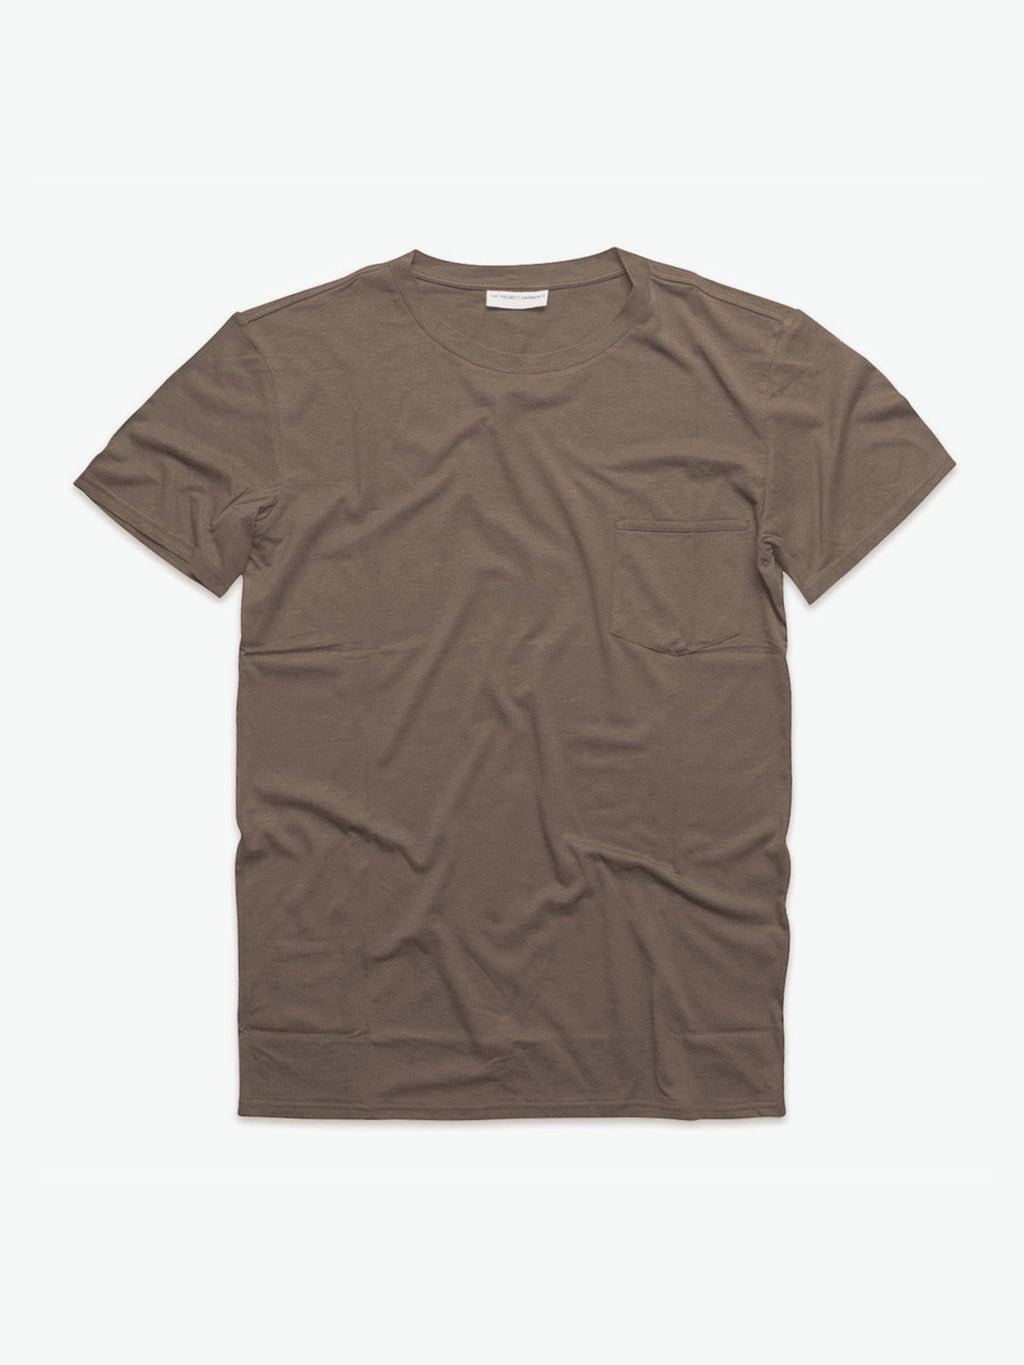 The Project Garments Crew Neck Modal-Blend Pocket T-shirt Taupe